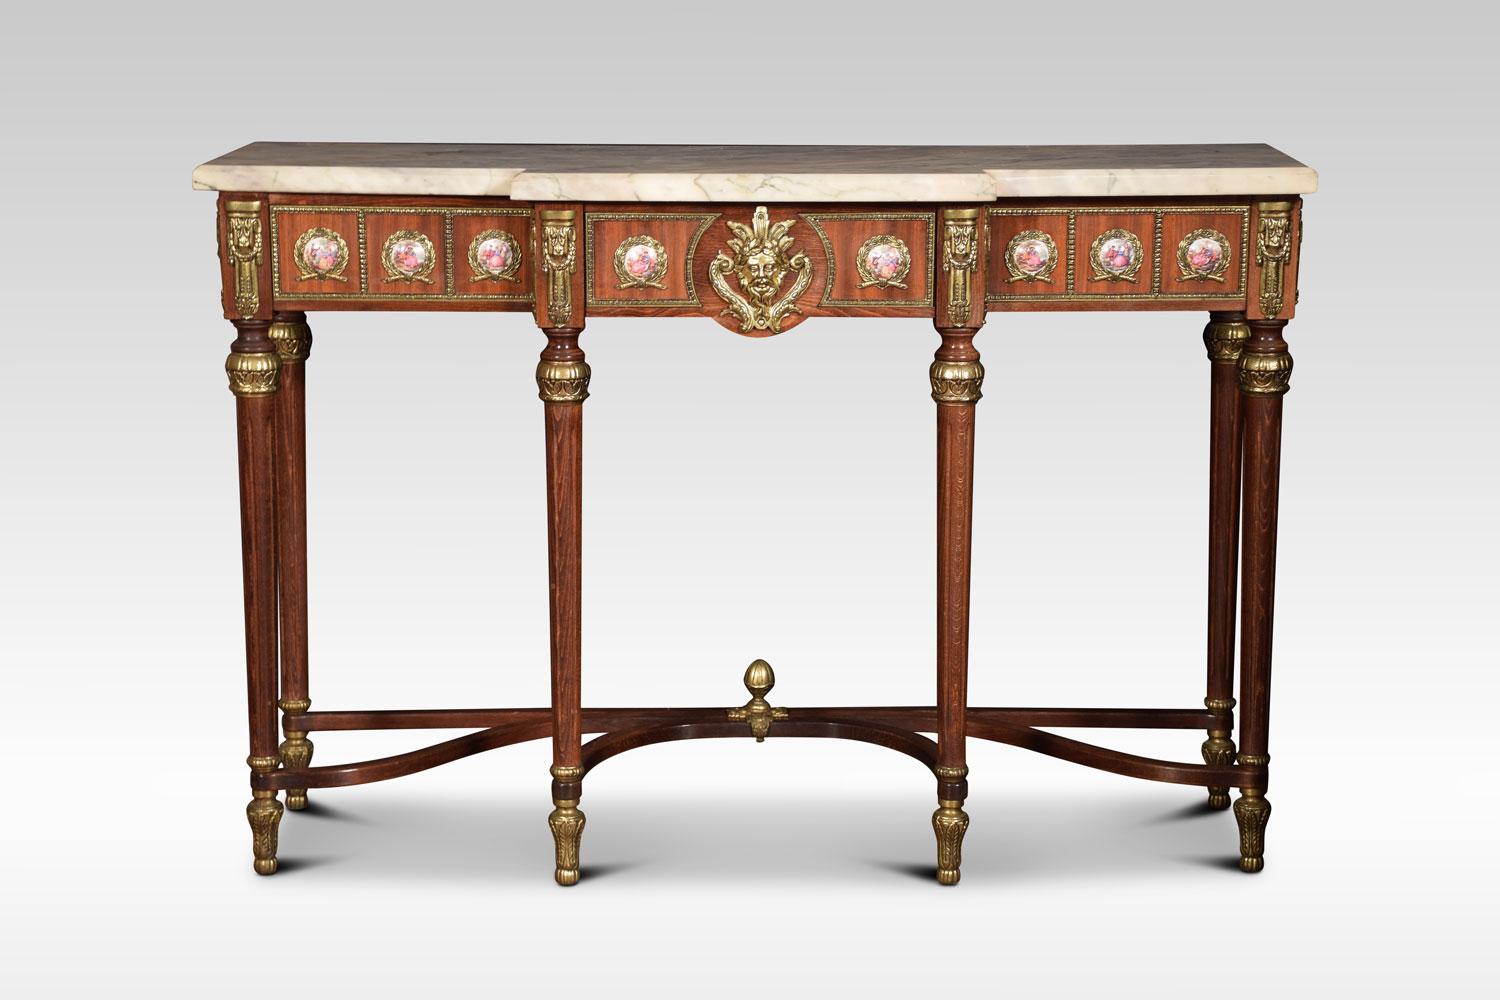 Louis XVI revival console table and mirror, the breakfront console table with marble top to the freeze having gilt metal mounts, and enamel plaques decorated with scenes of courting couples, raised up on fluted tapering supports united by serpentine